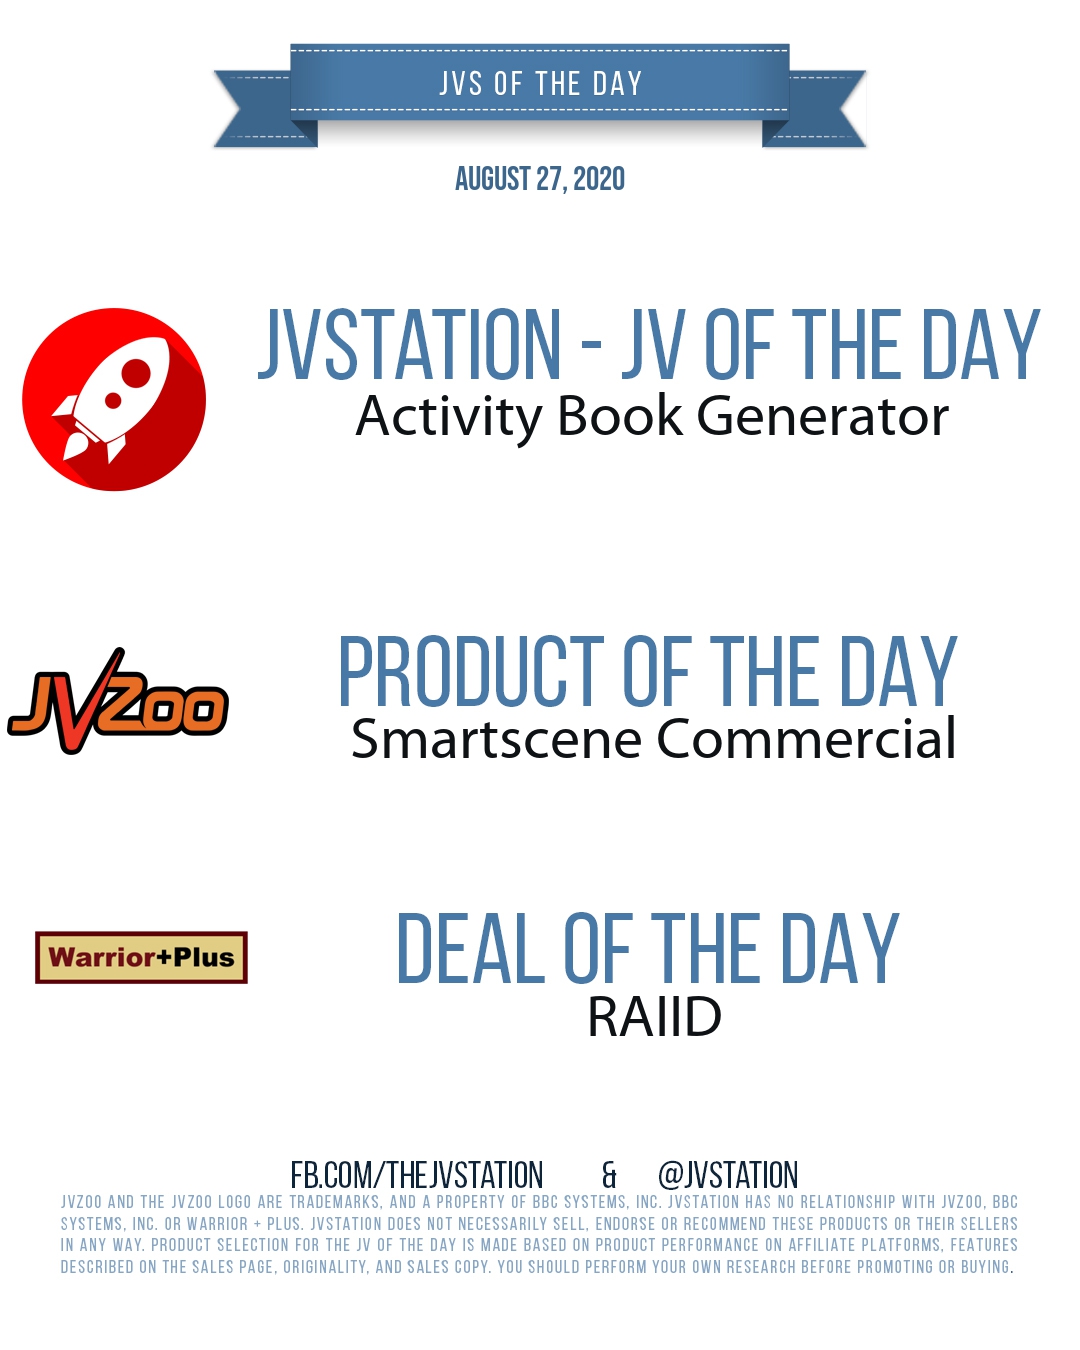 JVs of the day - August 27, 2020